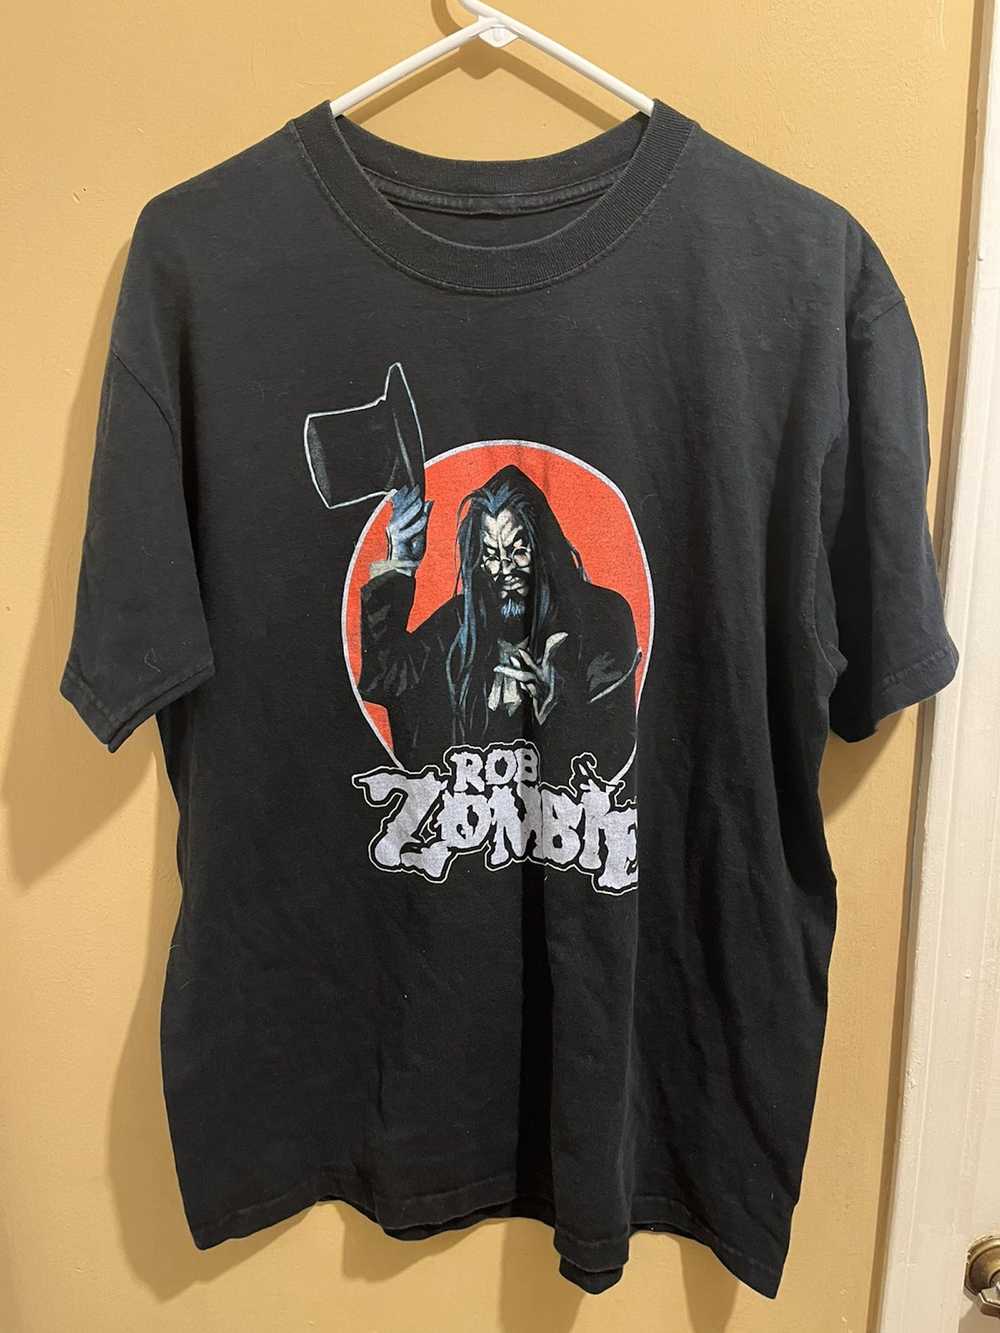 Band Tees × Vintage Rob Zombie your tee - image 1